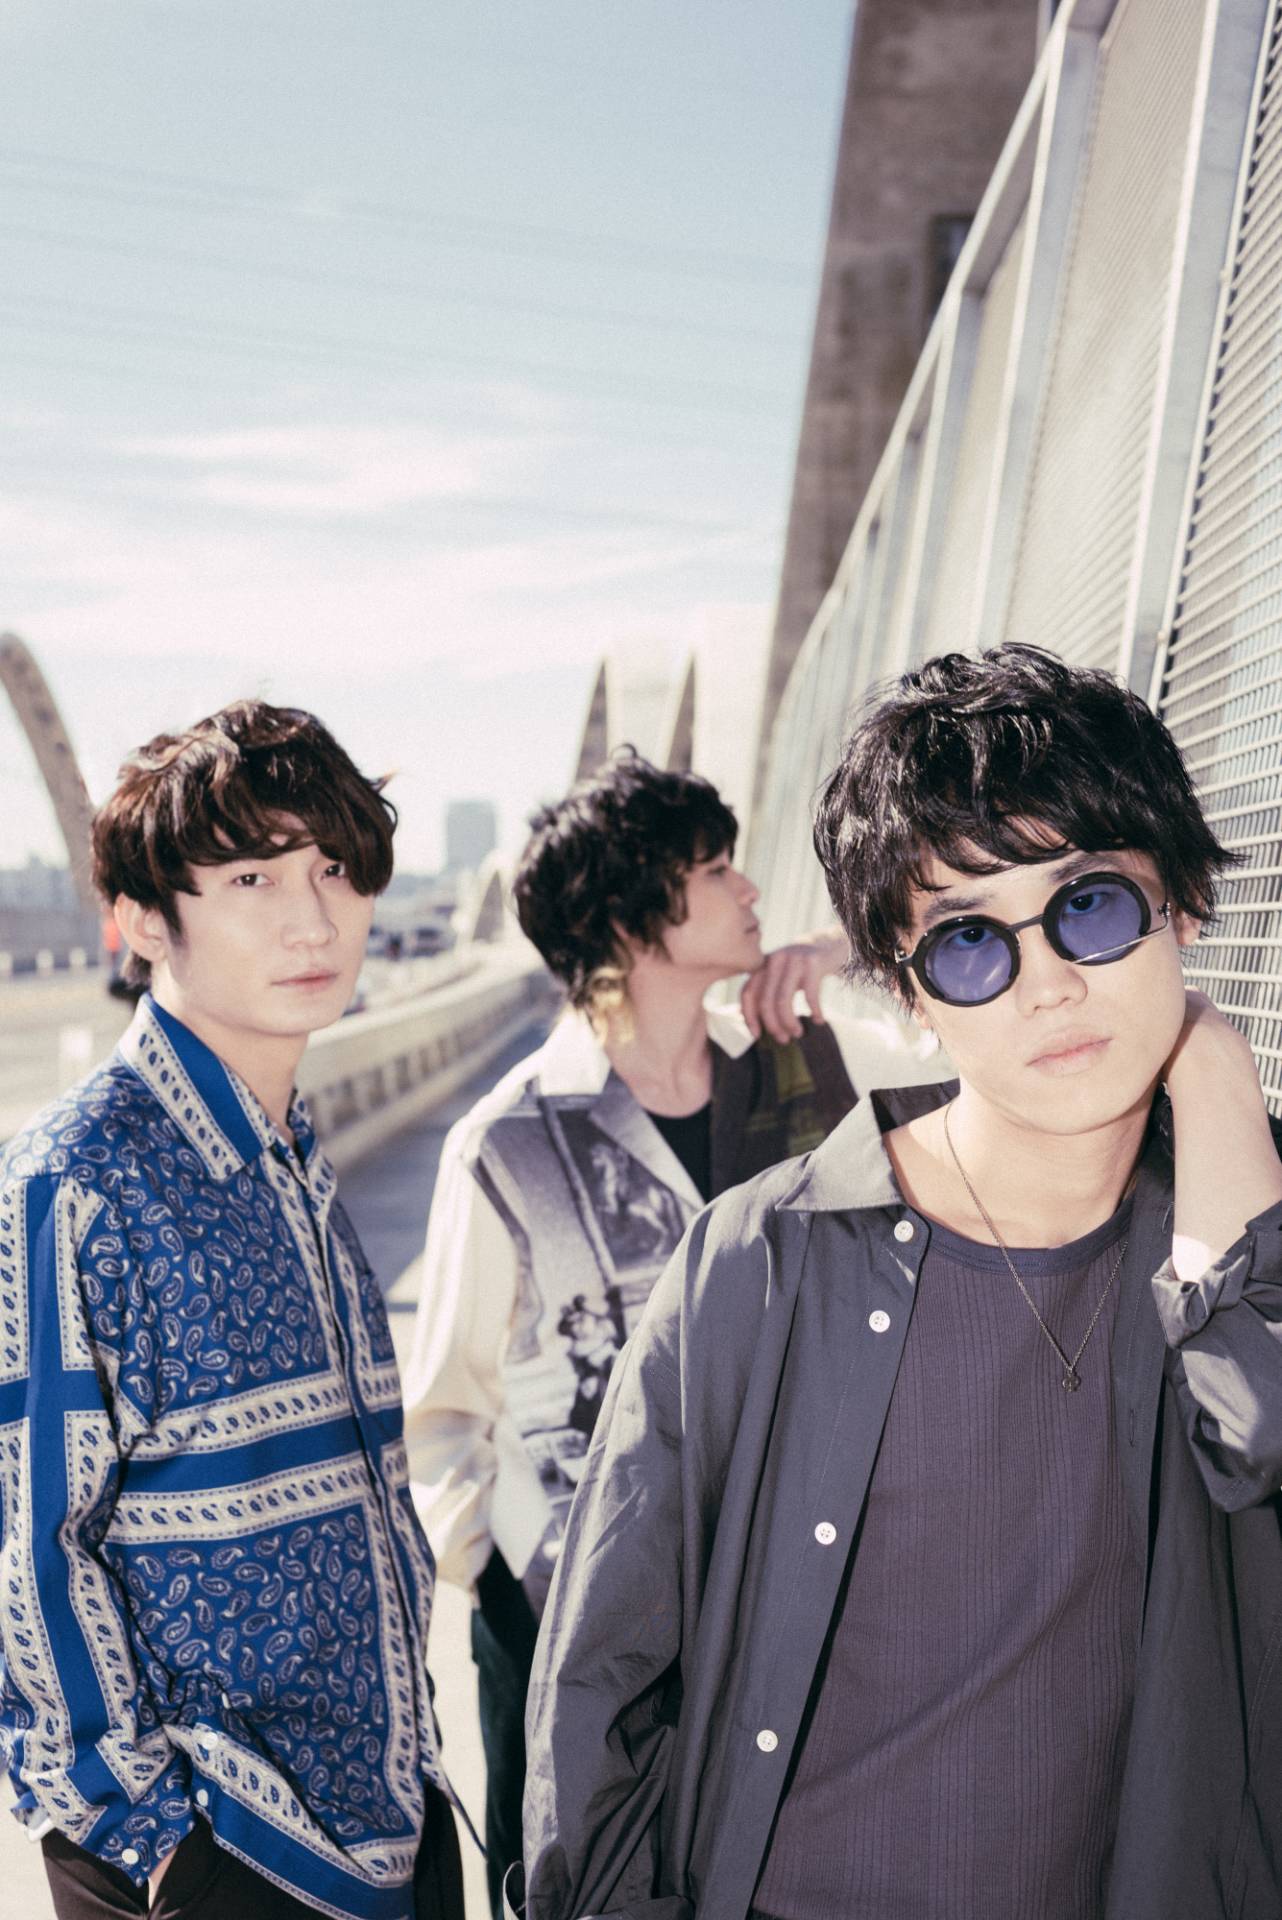 Haikyu Gets Music Video Featuring Fly High by BURNOUT SYNDROMES